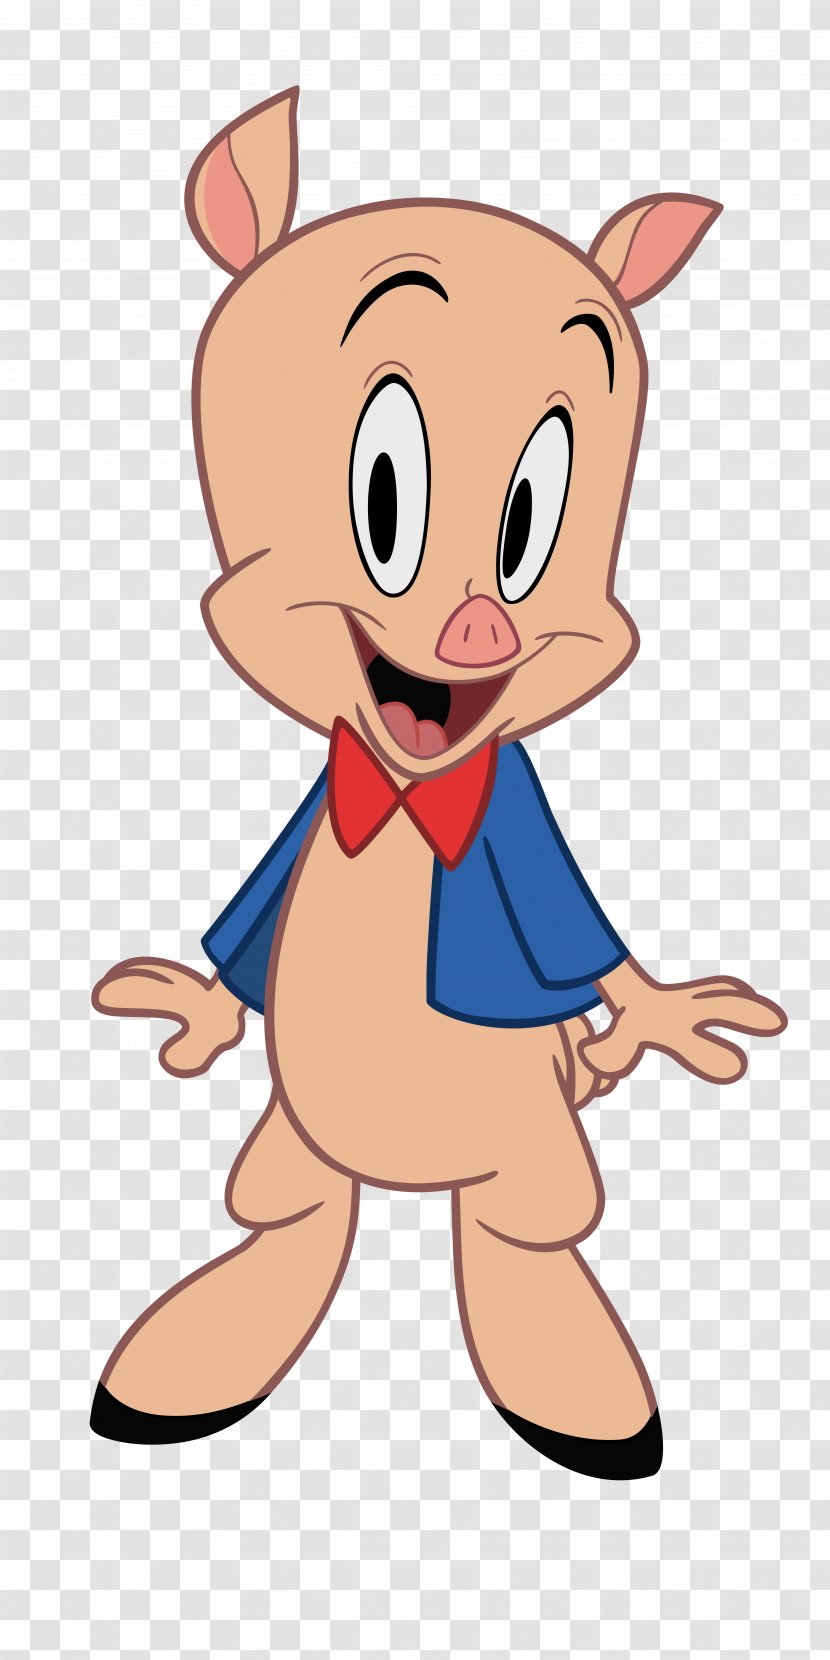 Porky Pig Petunia Speedy Gonzales Bugs Bunny Looney Tunes - Frame Transparent PNG